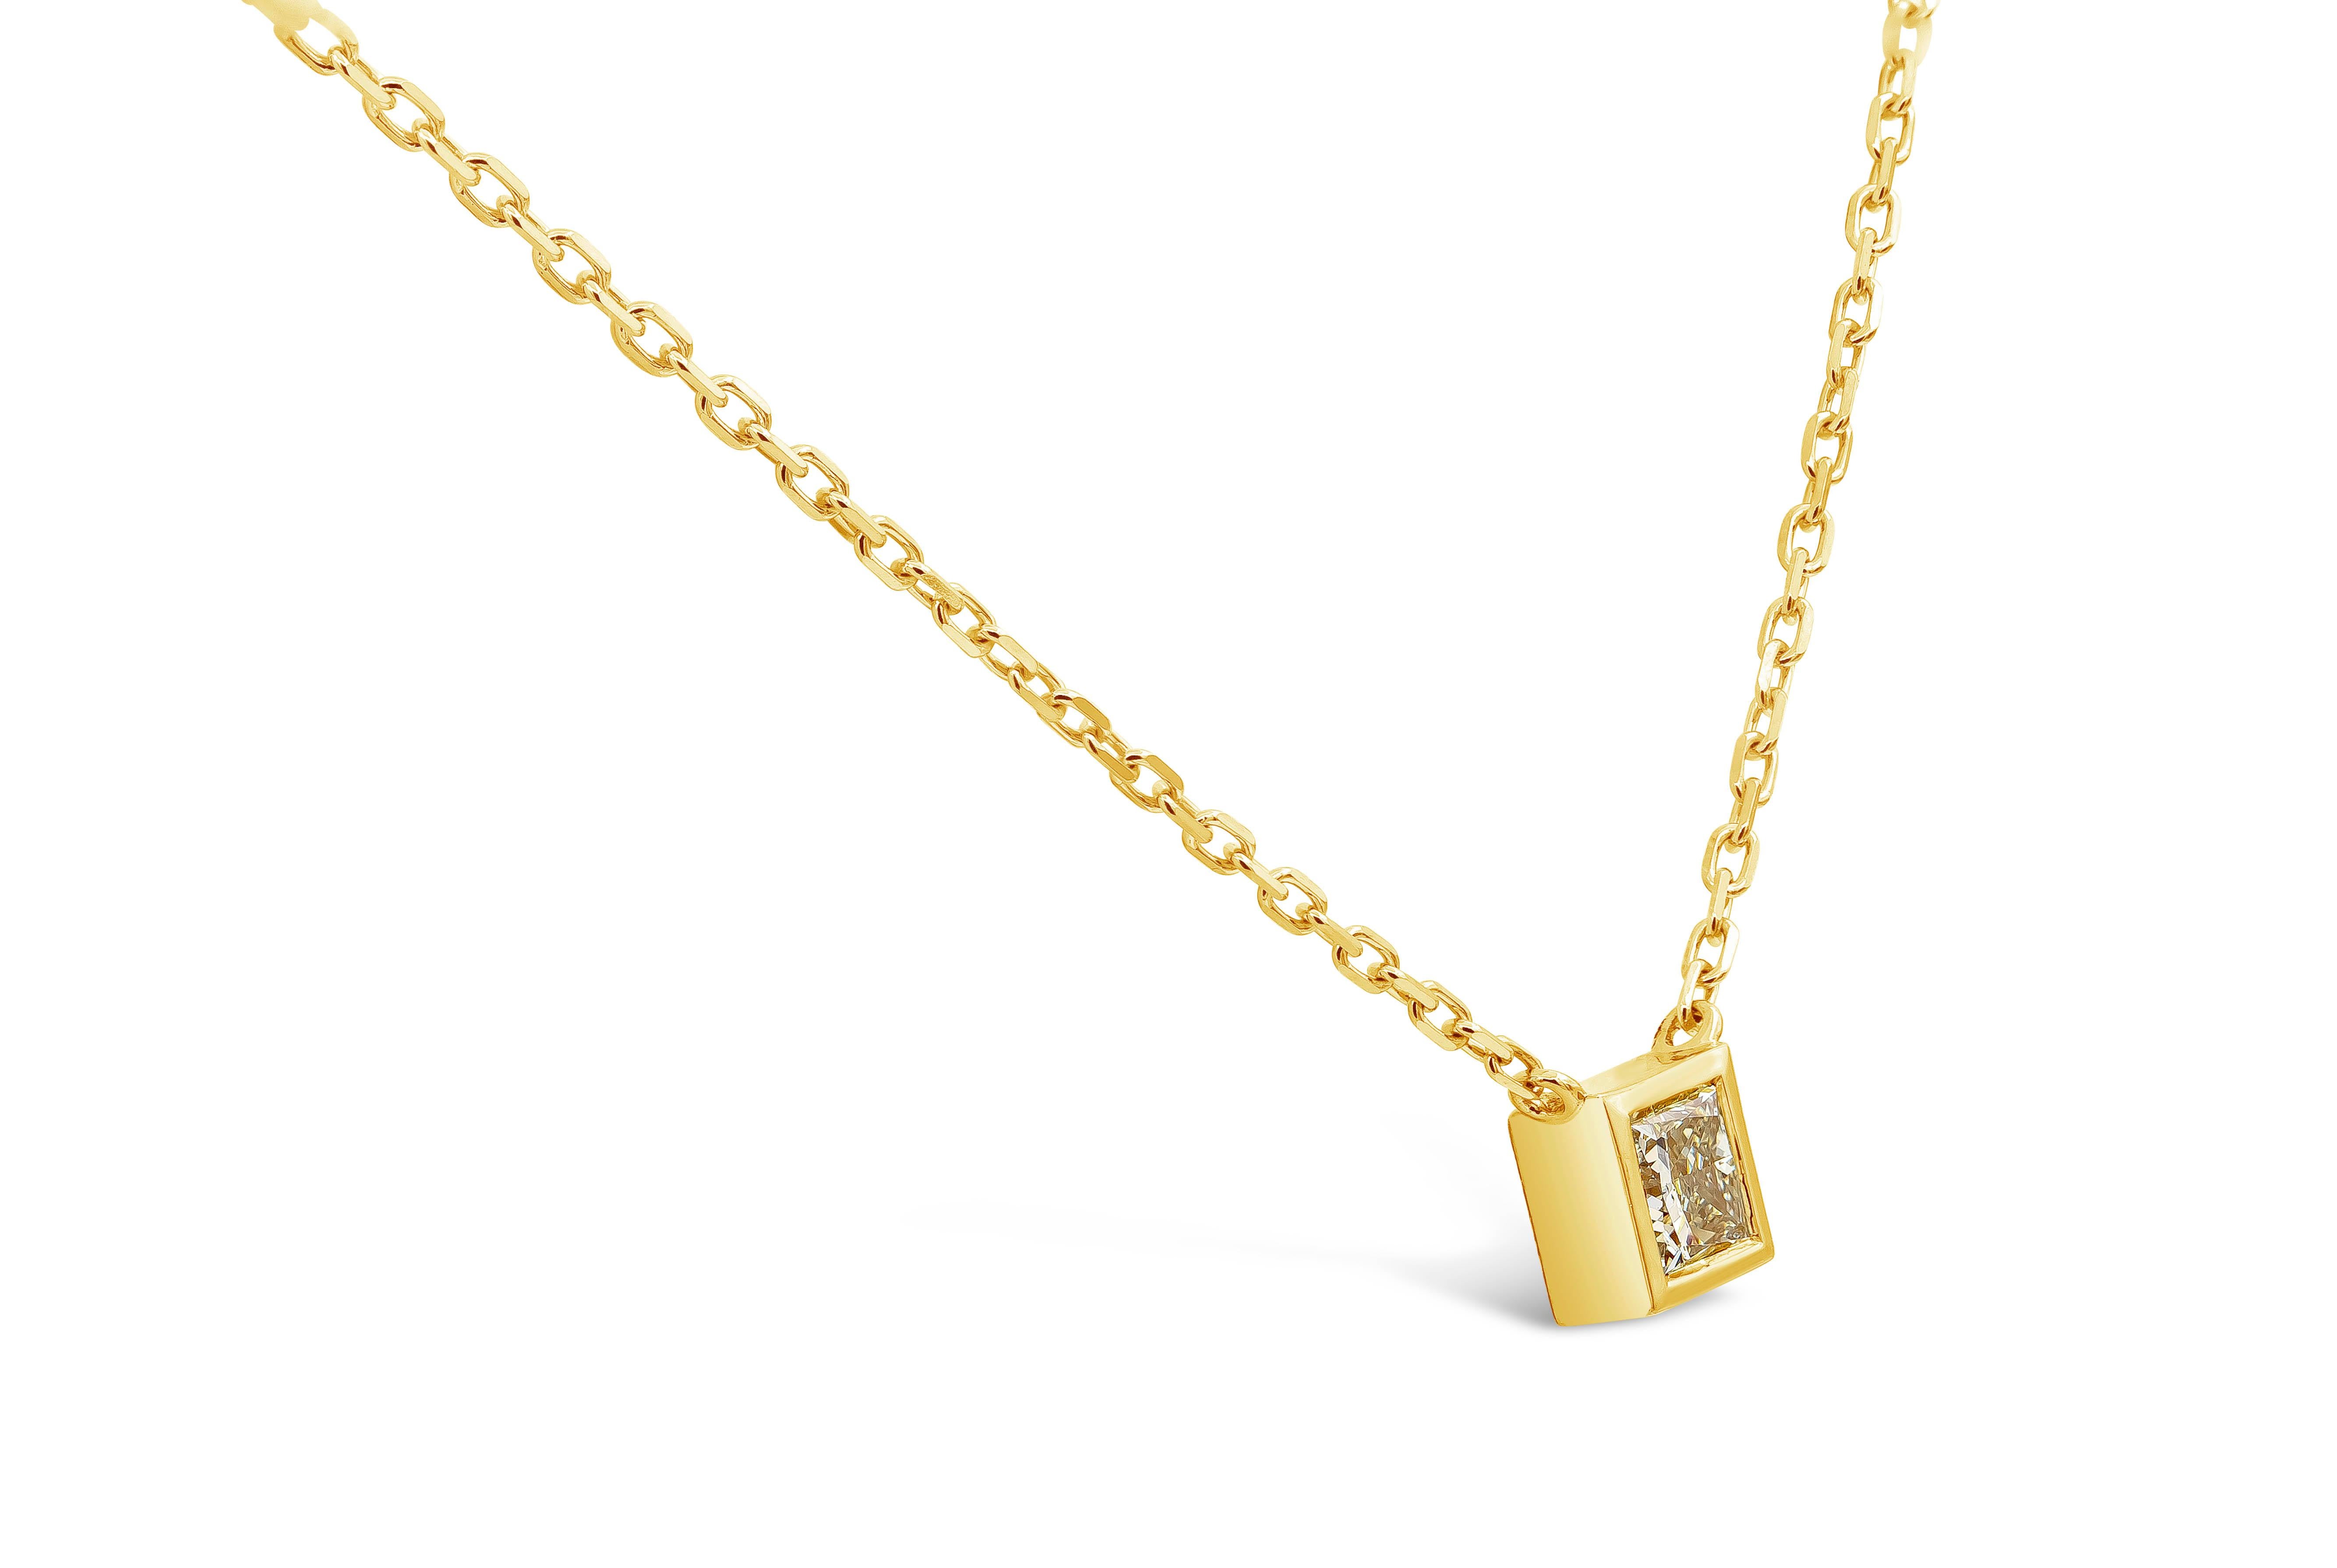 A simple and classic pendant necklace showcasing a 1.07 carats princess cut diamond, set in a polished bezel made in 14k yellow gold. Suspended on an adjustable 18 inch yellow gold chain. Diamond is approximately M-N color, SI1 clarity.

Roman